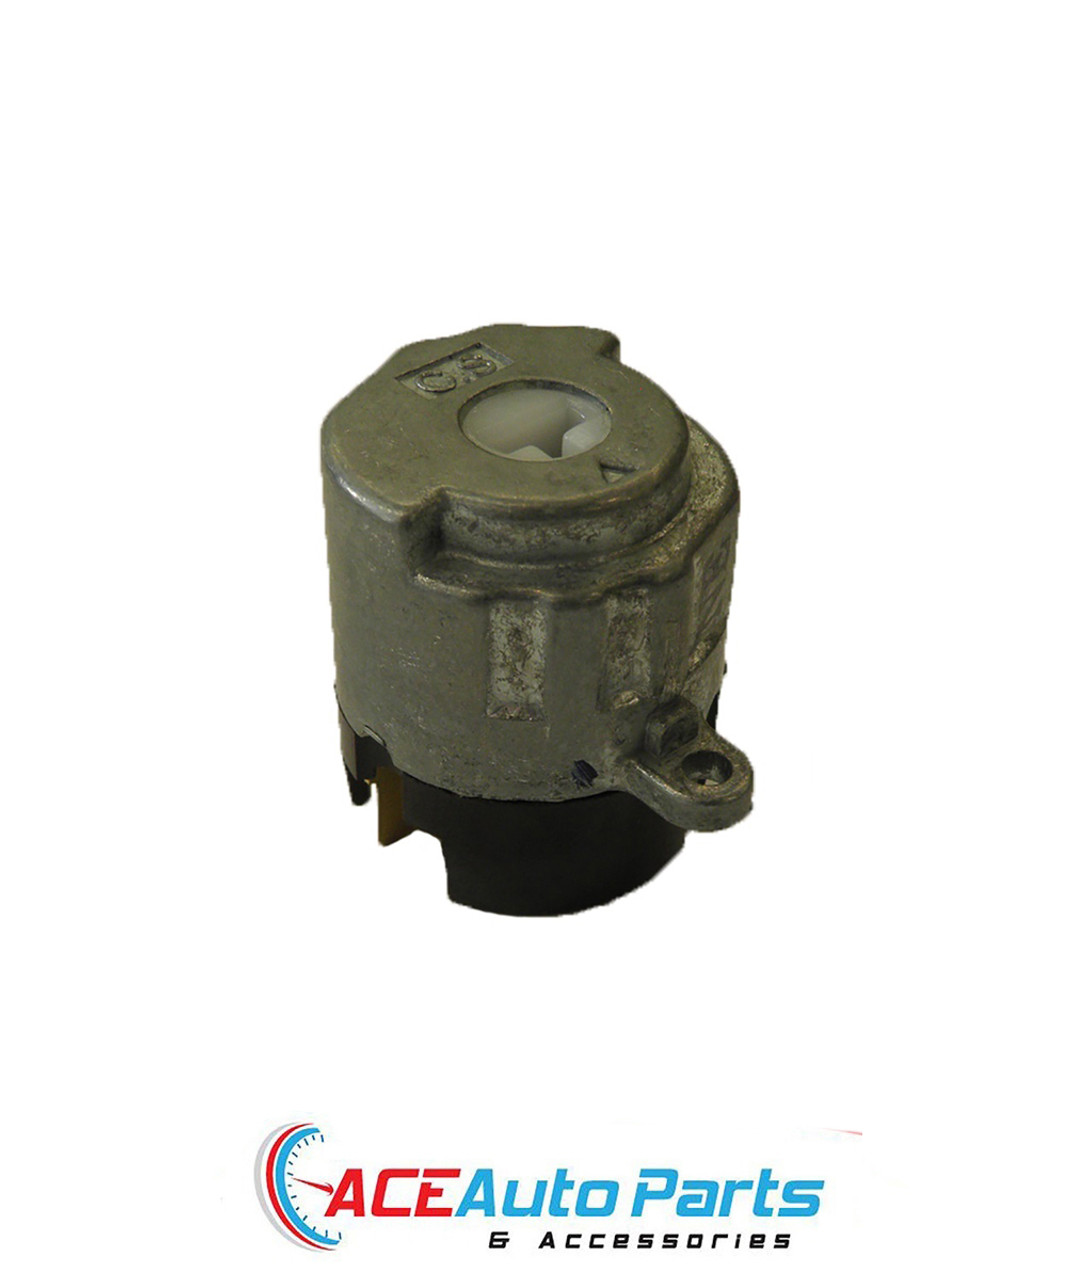 Ignition Switch for Nissan Patrol MQ 1981-1988